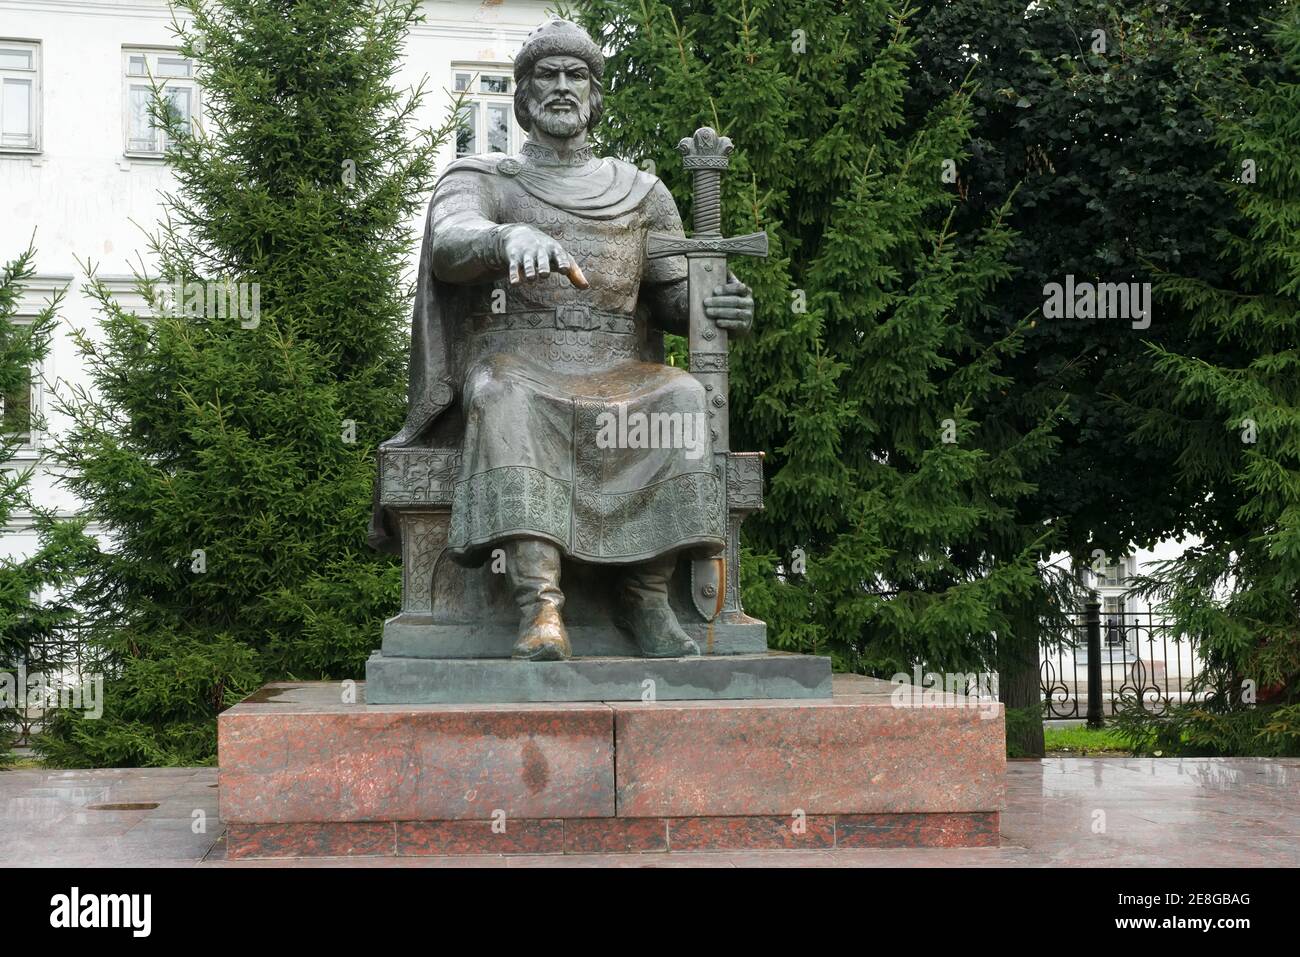 Kostroma, Russia - August 11, 2020: Monument to the founder of Kostroma - Prince Yuri Dolgoruky. Golden ring of Russia Stock Photo